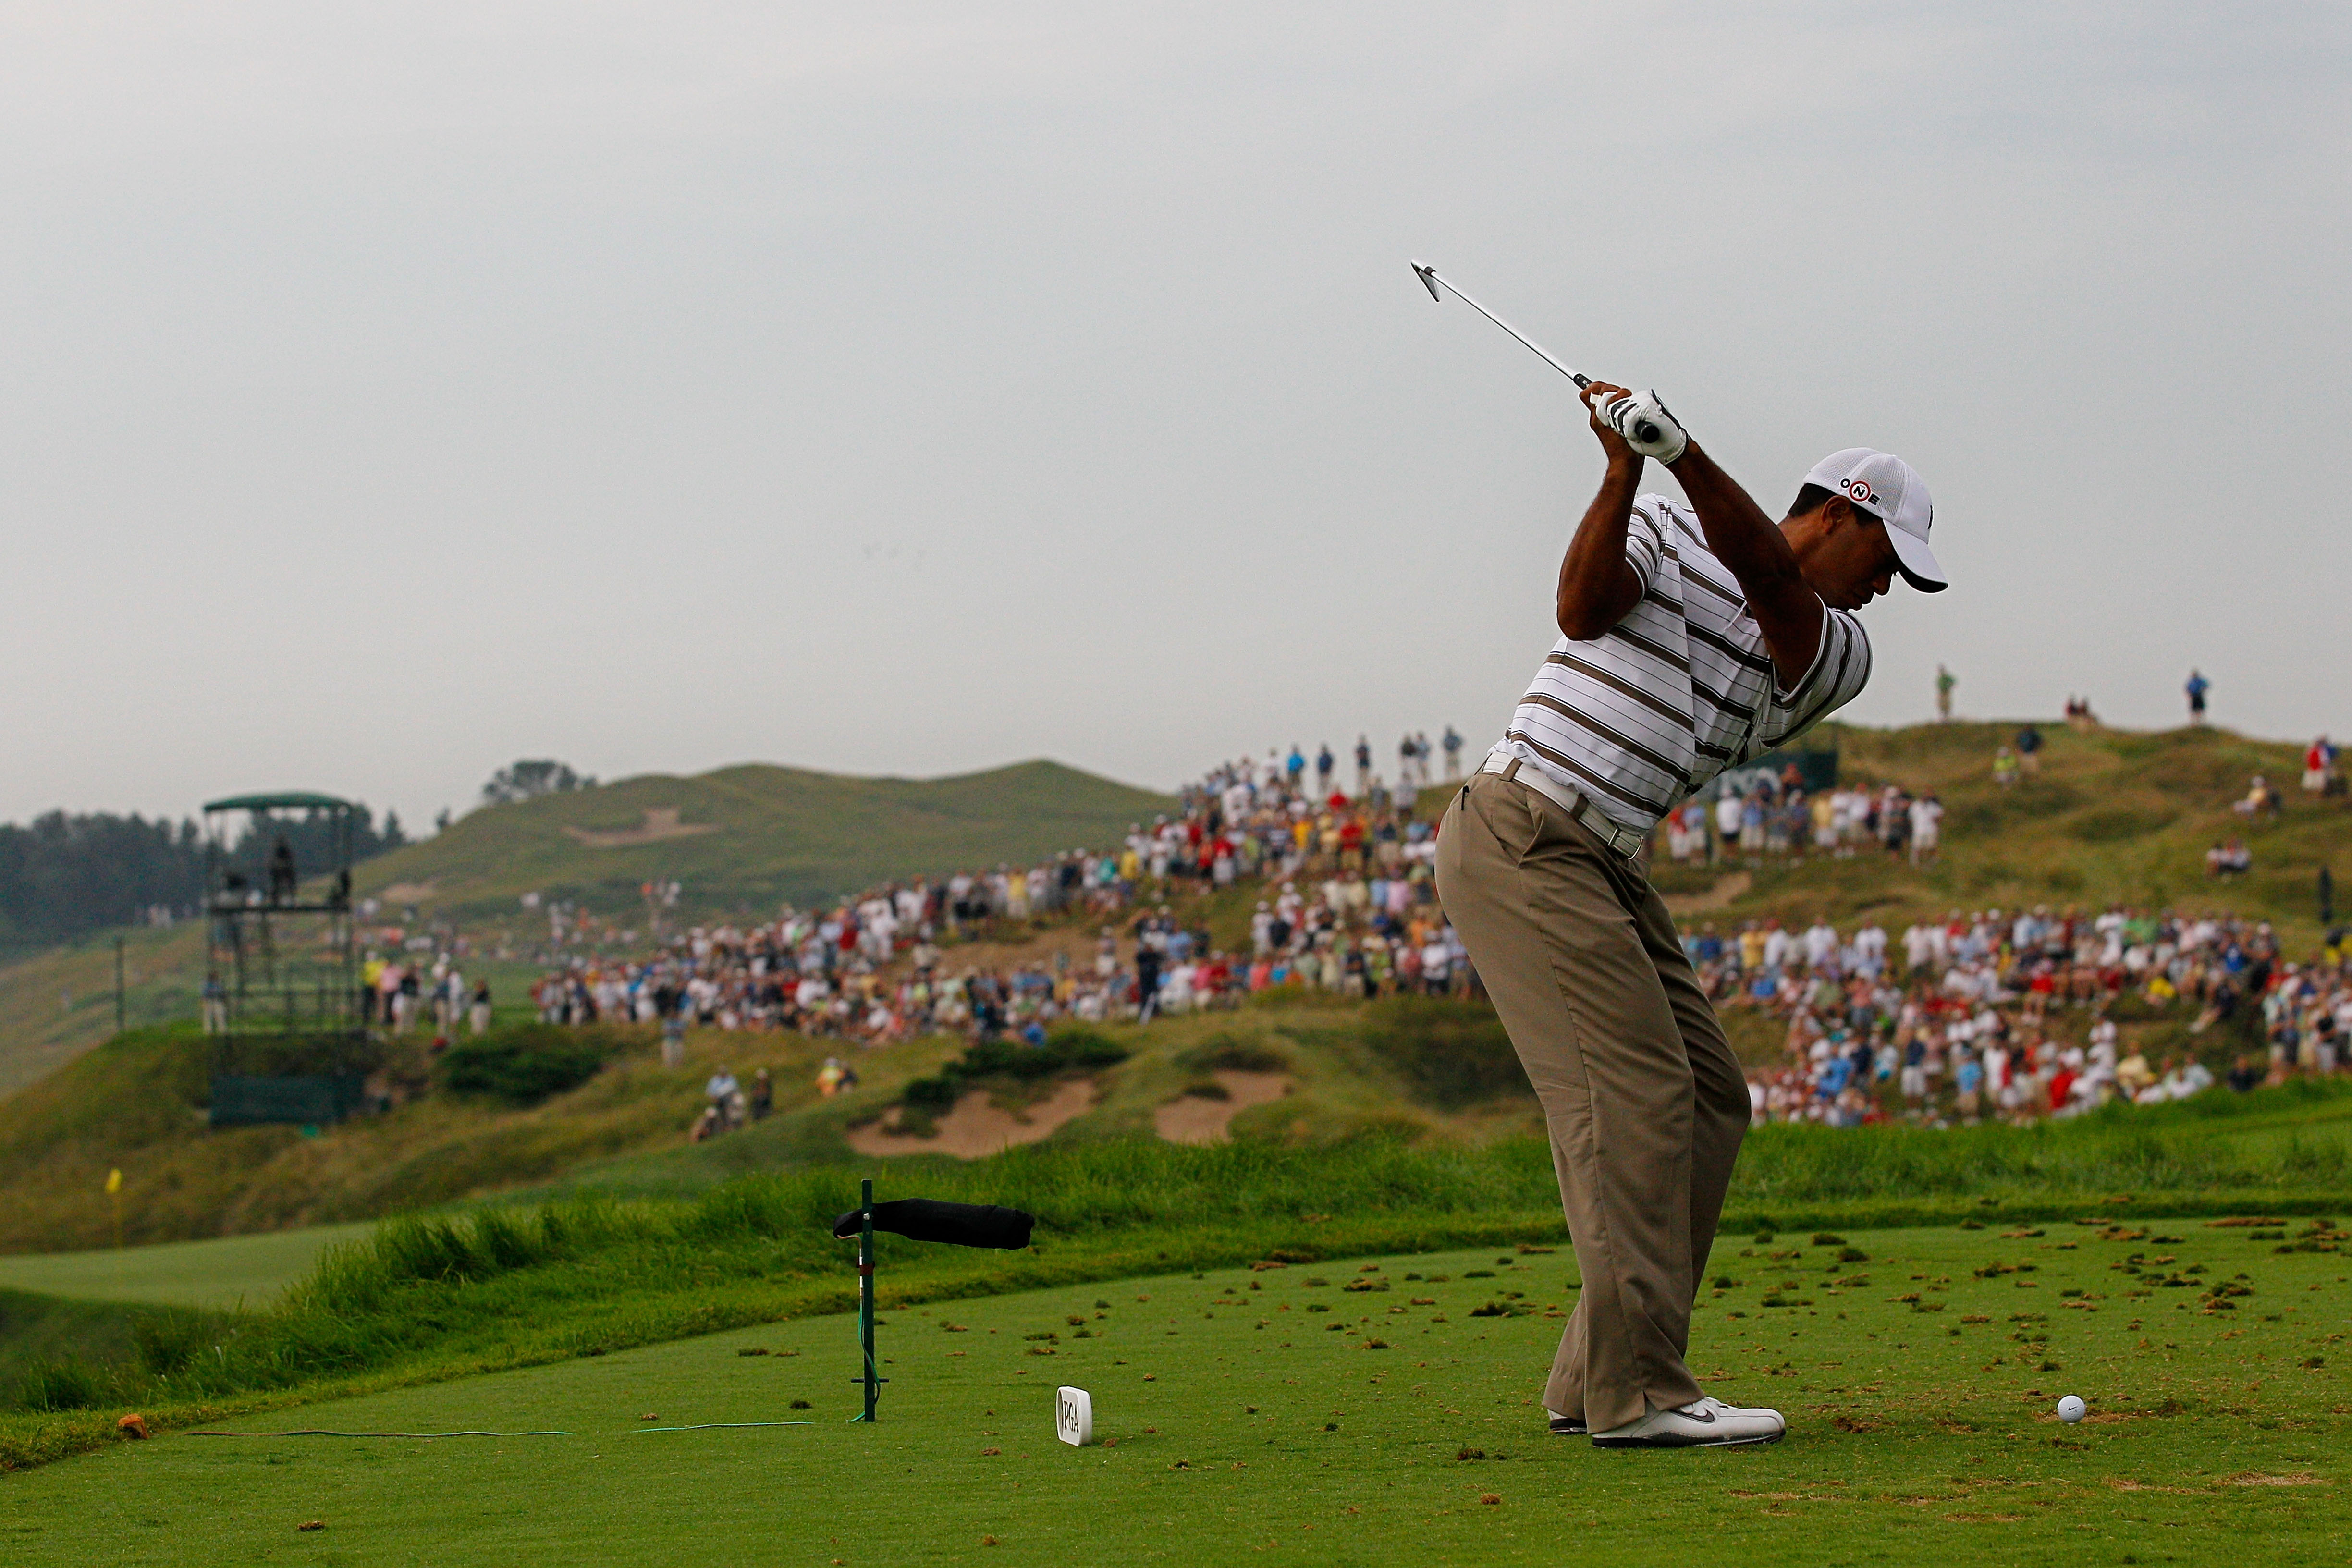 KOHLER, WI - AUGUST 13:  Tiger Woods hits his tee shot on the third hole during the second round of the 92nd PGA Championship on the Straits Course at Whistling Straits on August 13, 2010 in Kohler, Wisconsin.  (Photo by Sam Greenwood/Getty Images)